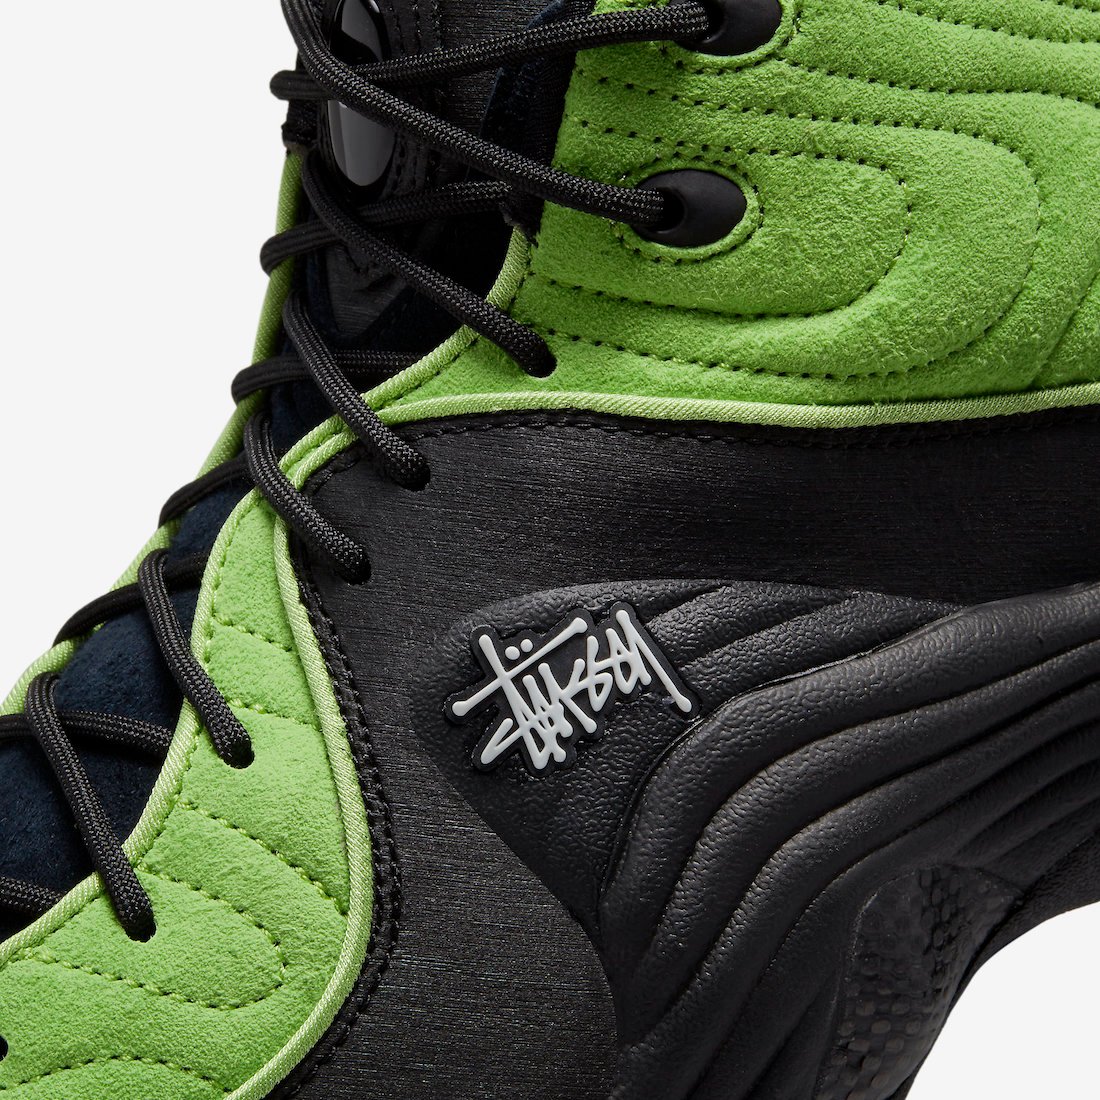 Stussy Nike Air Penny 2 Green Black DX6933-300 Release Date